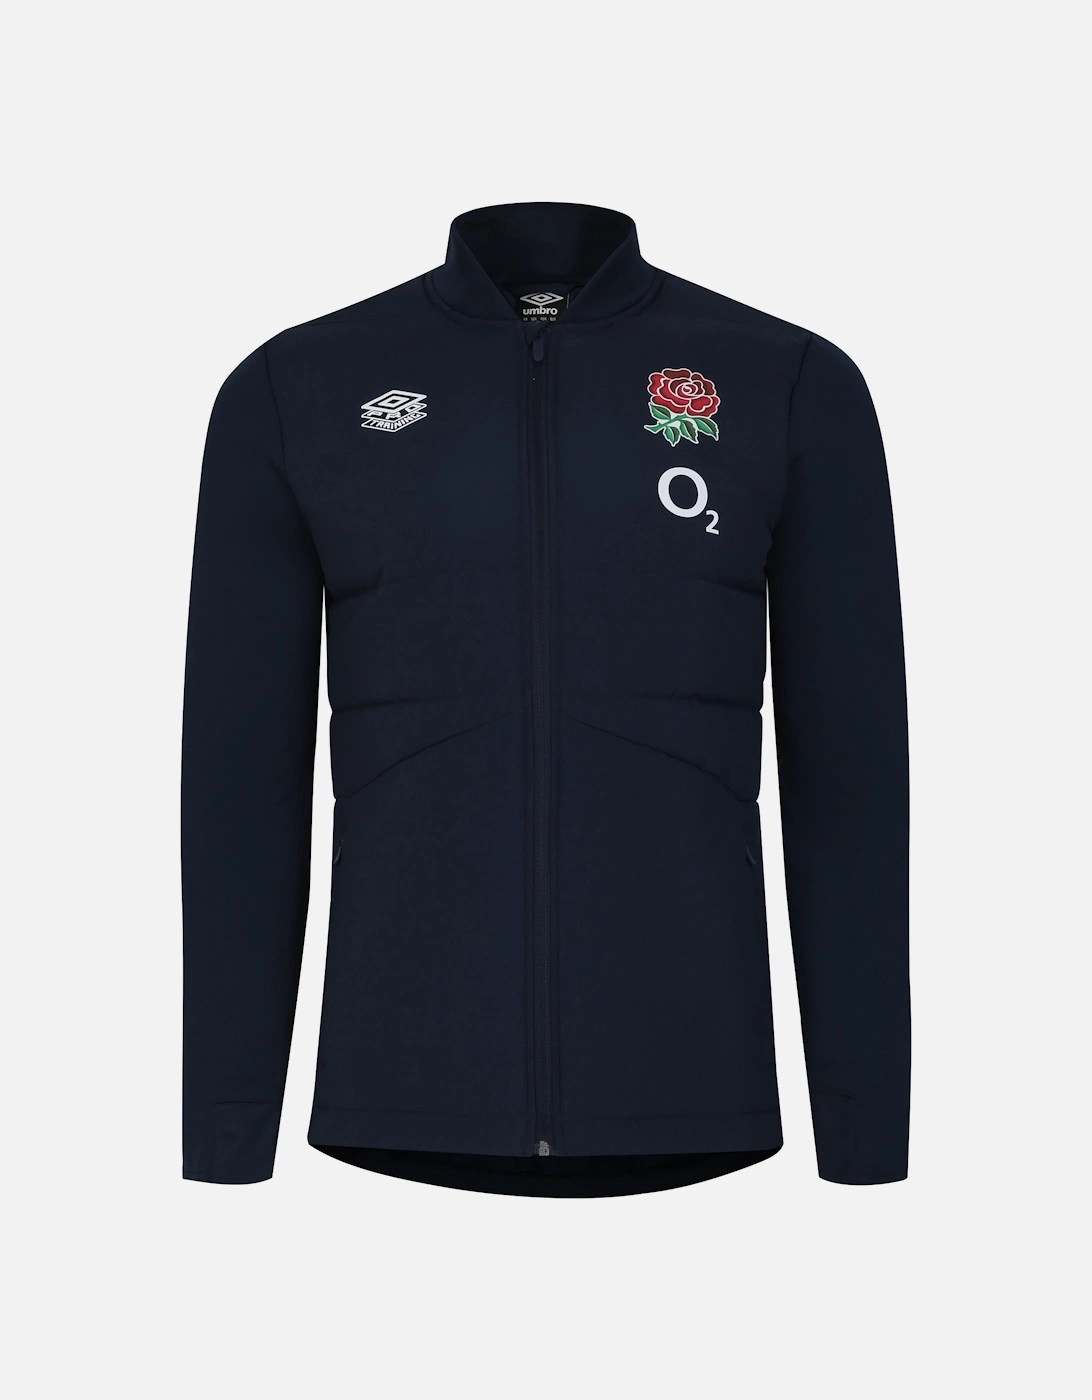 Mens 23/24 England Rugby Thermal Jacket, 5 of 4